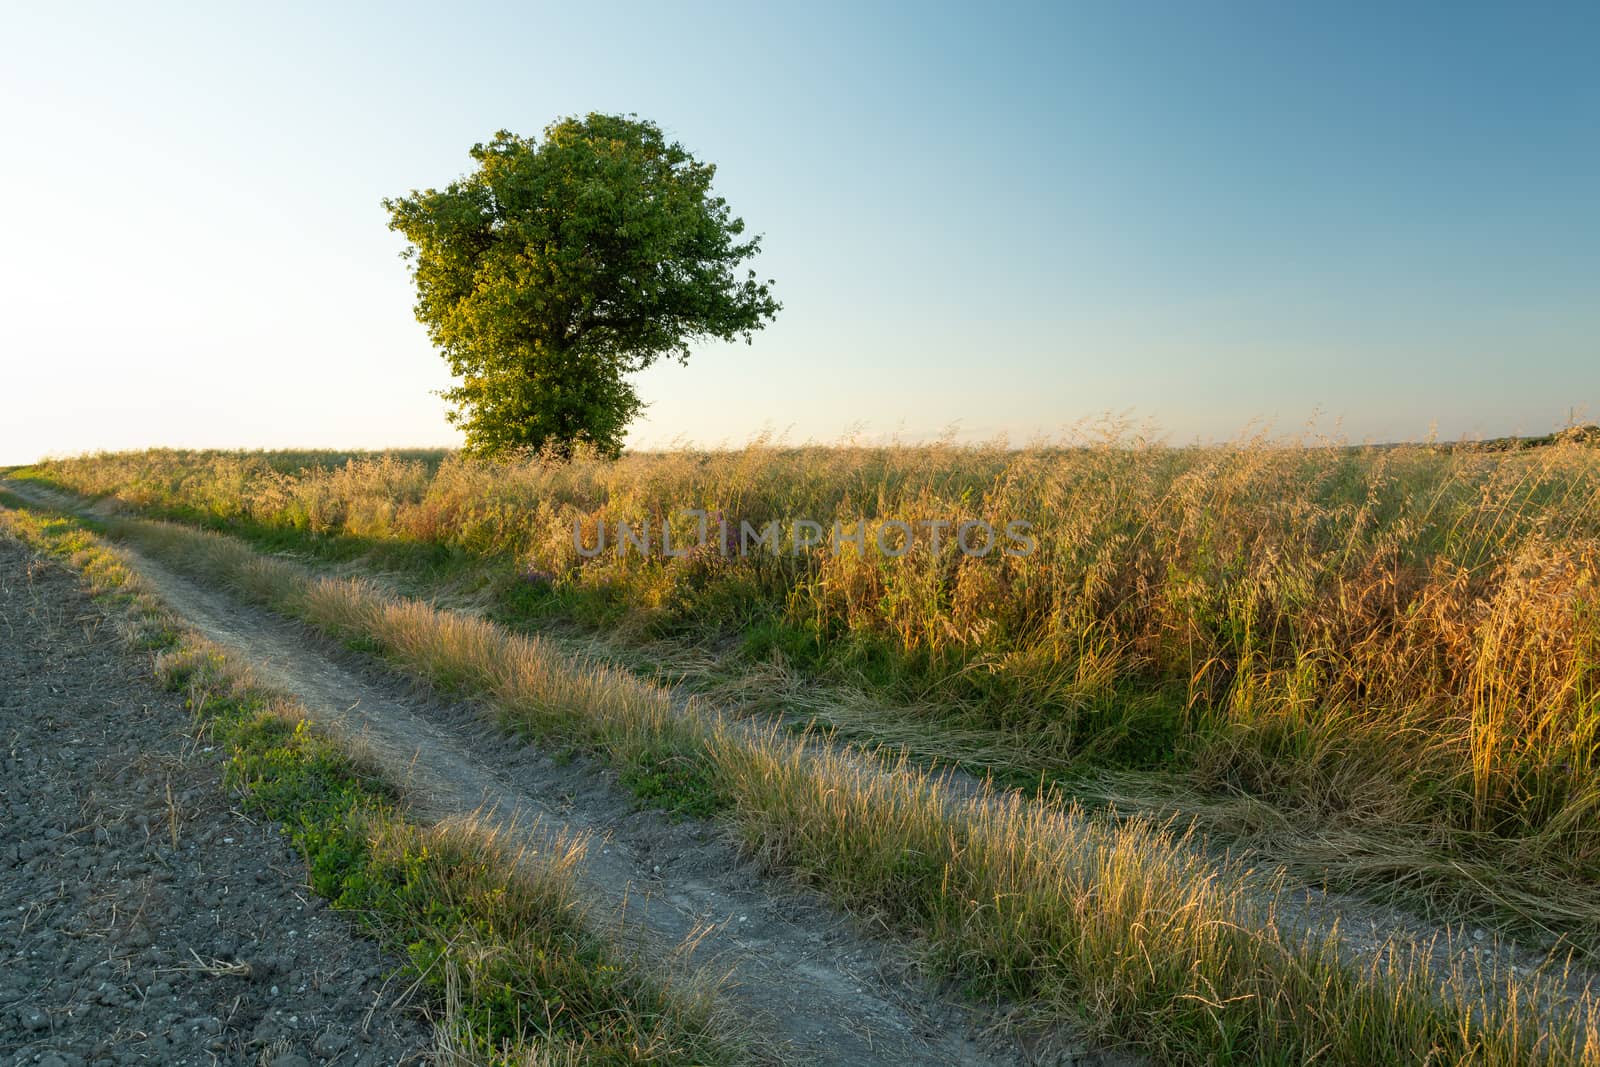 A dirt road through fields and a lonely green tree